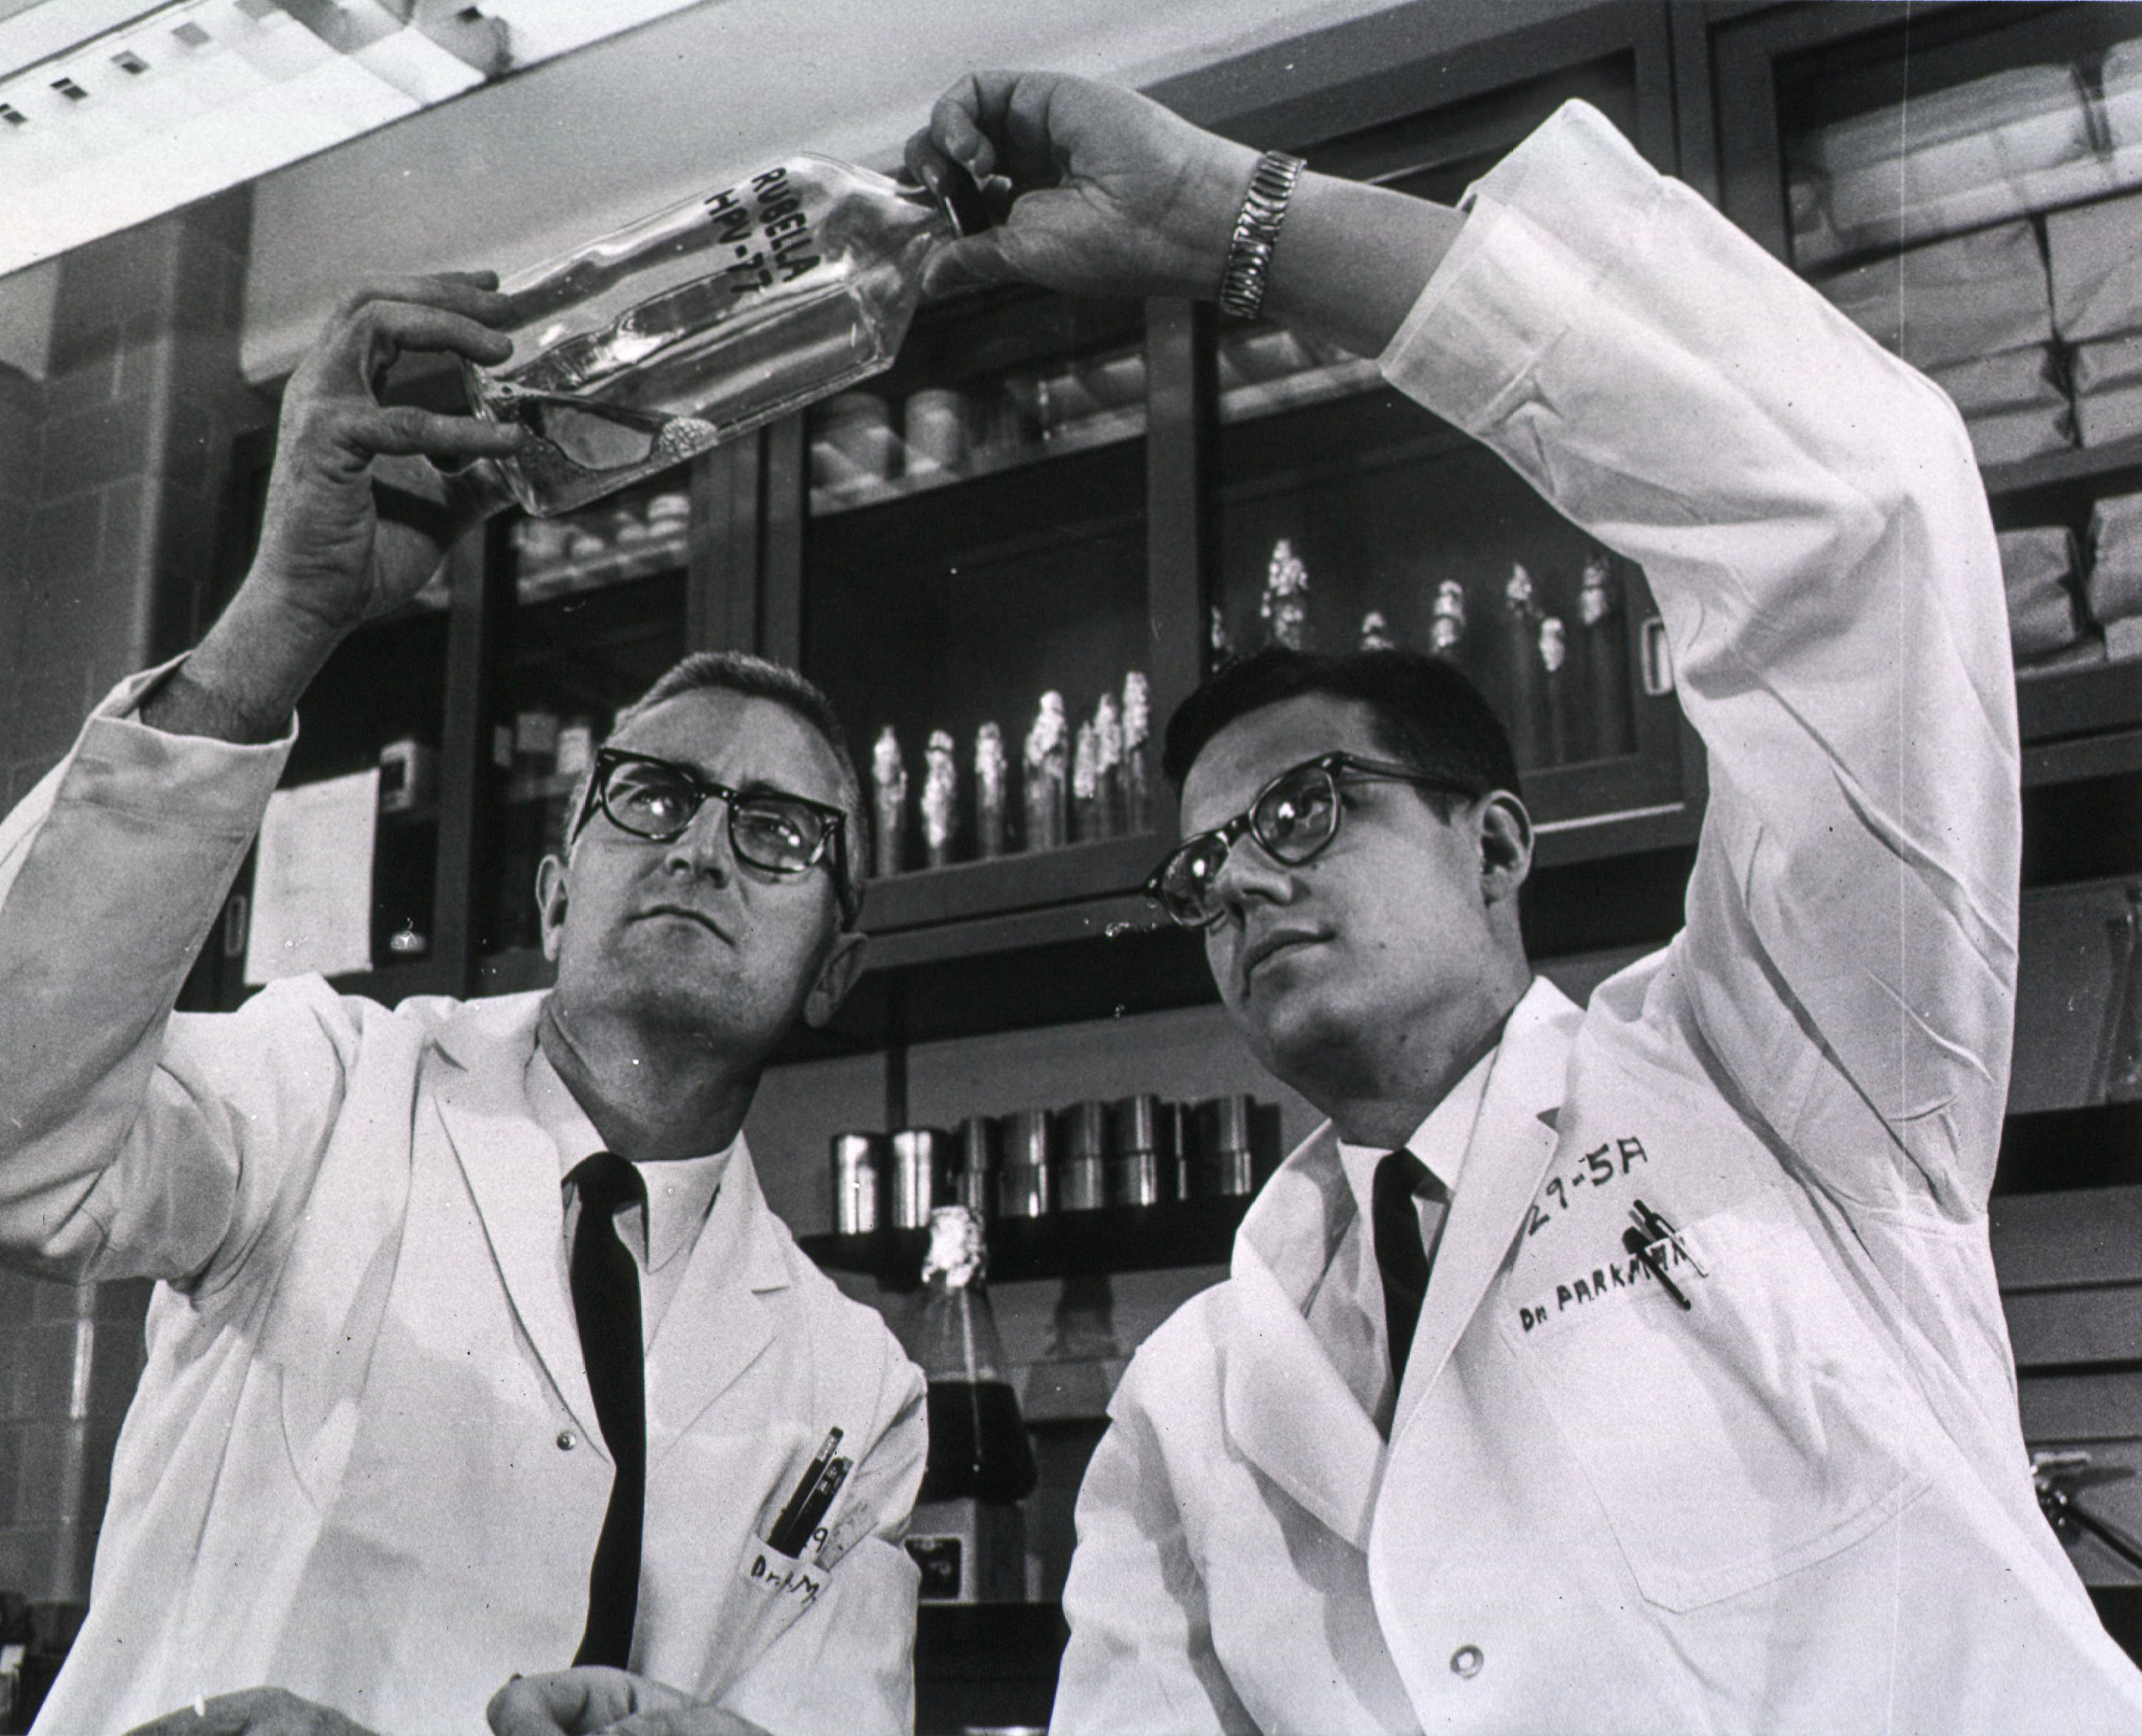 a photo of Drs. Parkman and Meyer wearing white lab coats holding the rubella virus in a jar in a lab